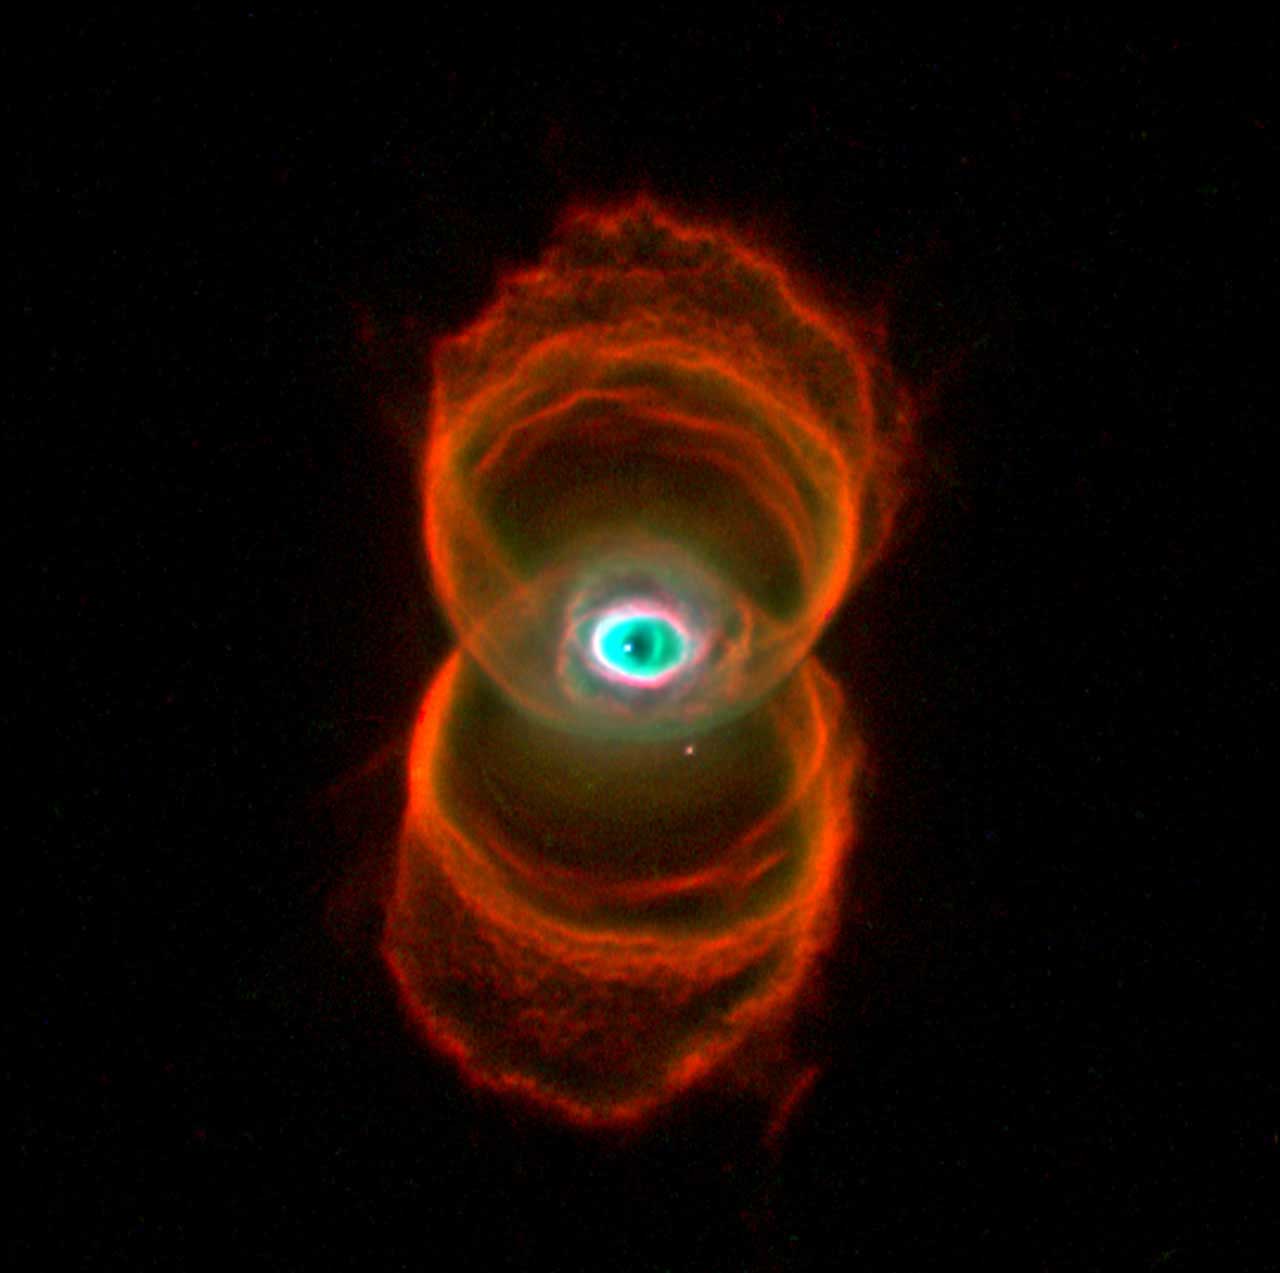 The Hourglass Nebula:
                              
                              The nebula, also known as MyCn18, is a young planetary nebula located about 8,000 light-years away. The image shed new light on the poorly understood ejection of stellar matter which accompanies the slow death of Sun-like stars. 
                              
                              Image released on Jan. 16, 1996